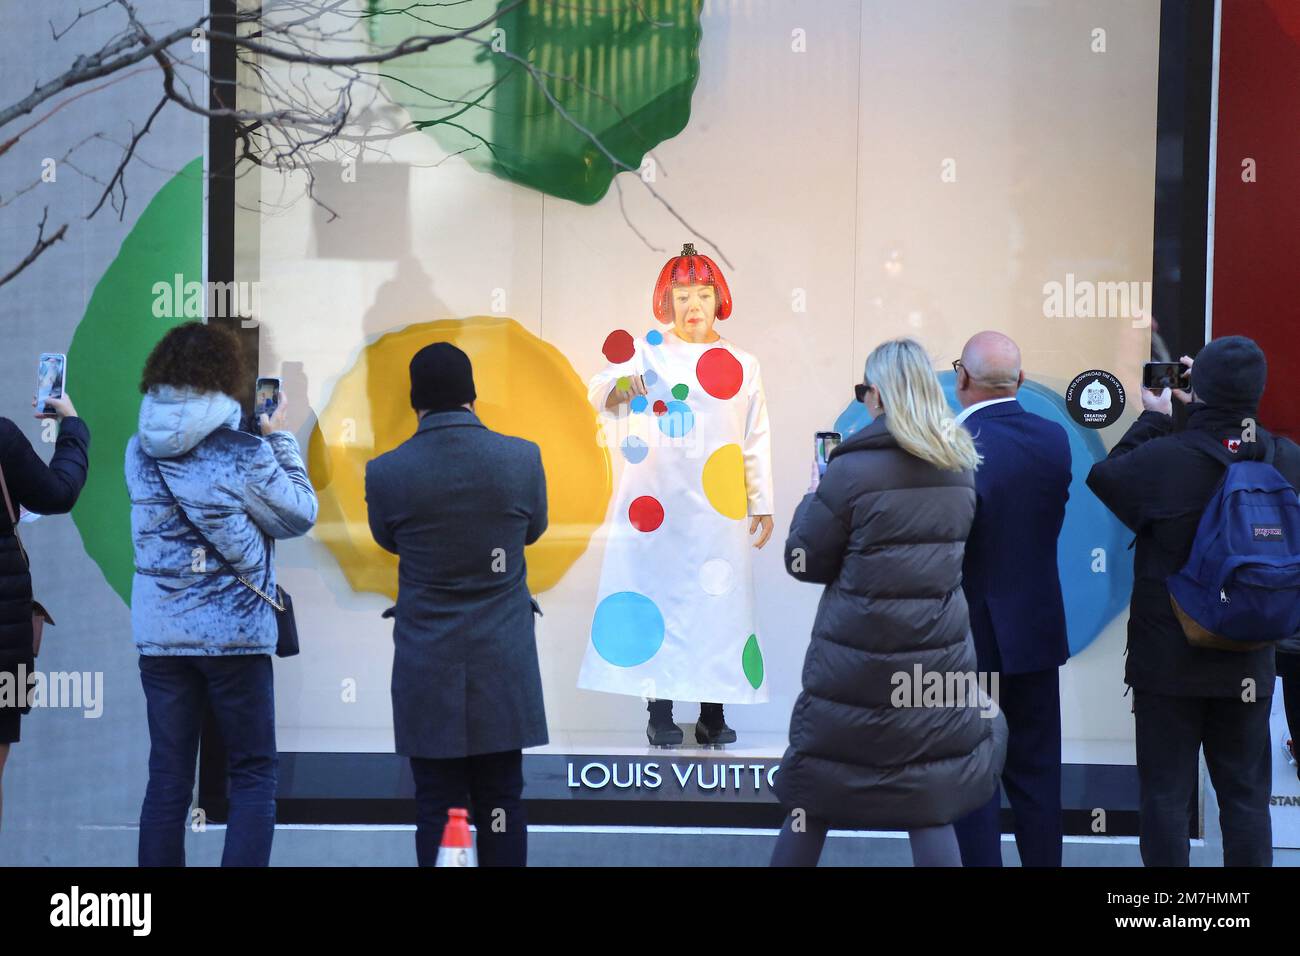 Yayoi Kusama's robot painting live at the Louis Vuitton store in